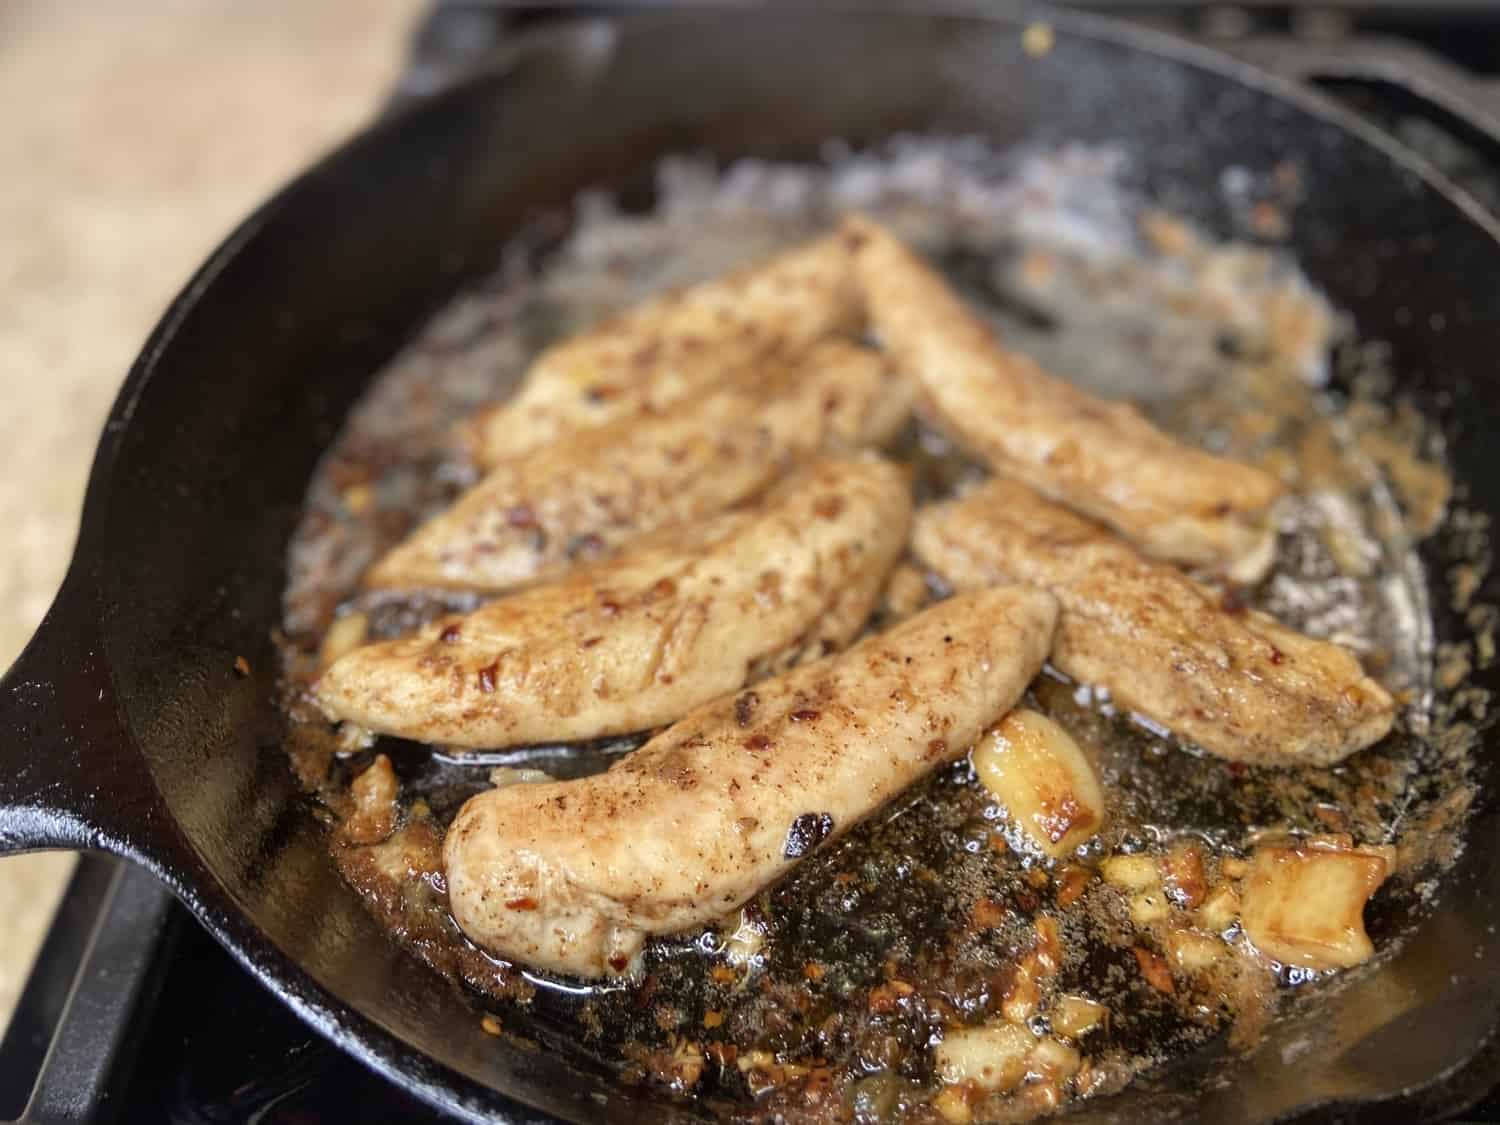 Cooking the chicken in a cast iron pan.